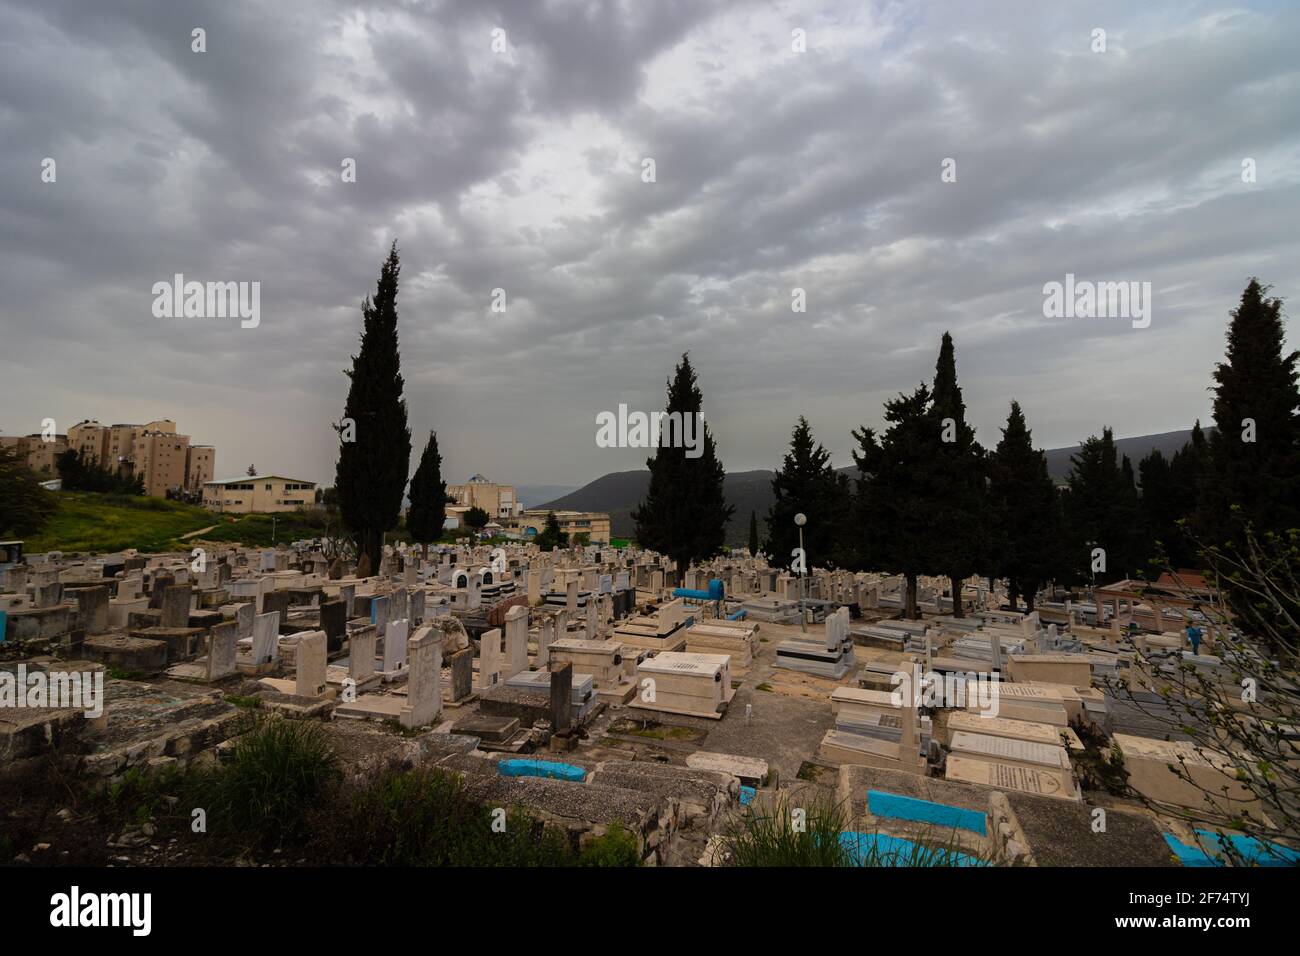 tzfat-israel. 22-03-2021. top view of Crowded tombs, in the new cemetery in the city of tzfat, in the background of a cloudy winter sky Stock Photo